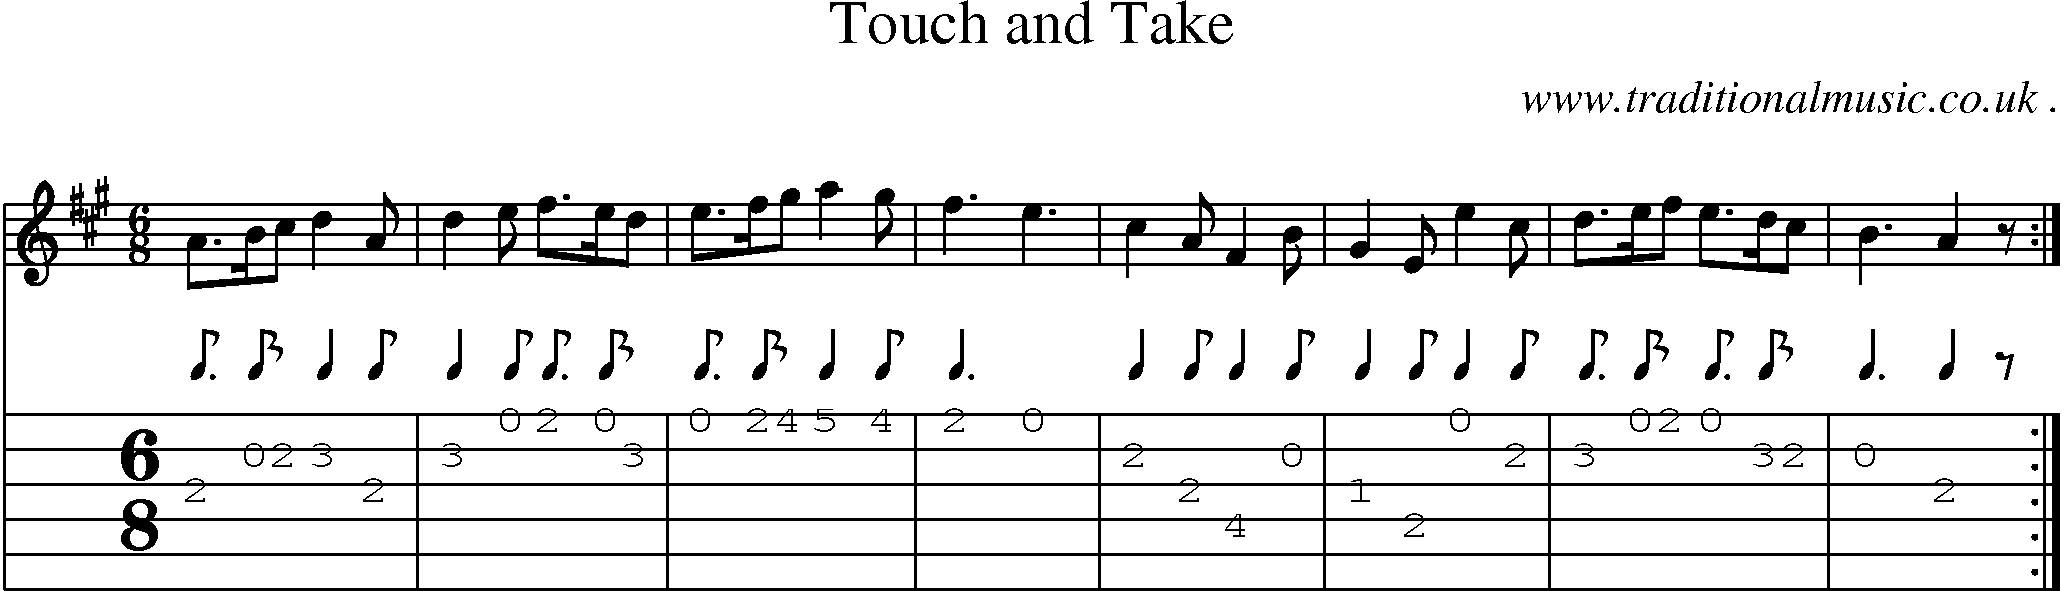 Sheet-Music and Guitar Tabs for Touch And Take